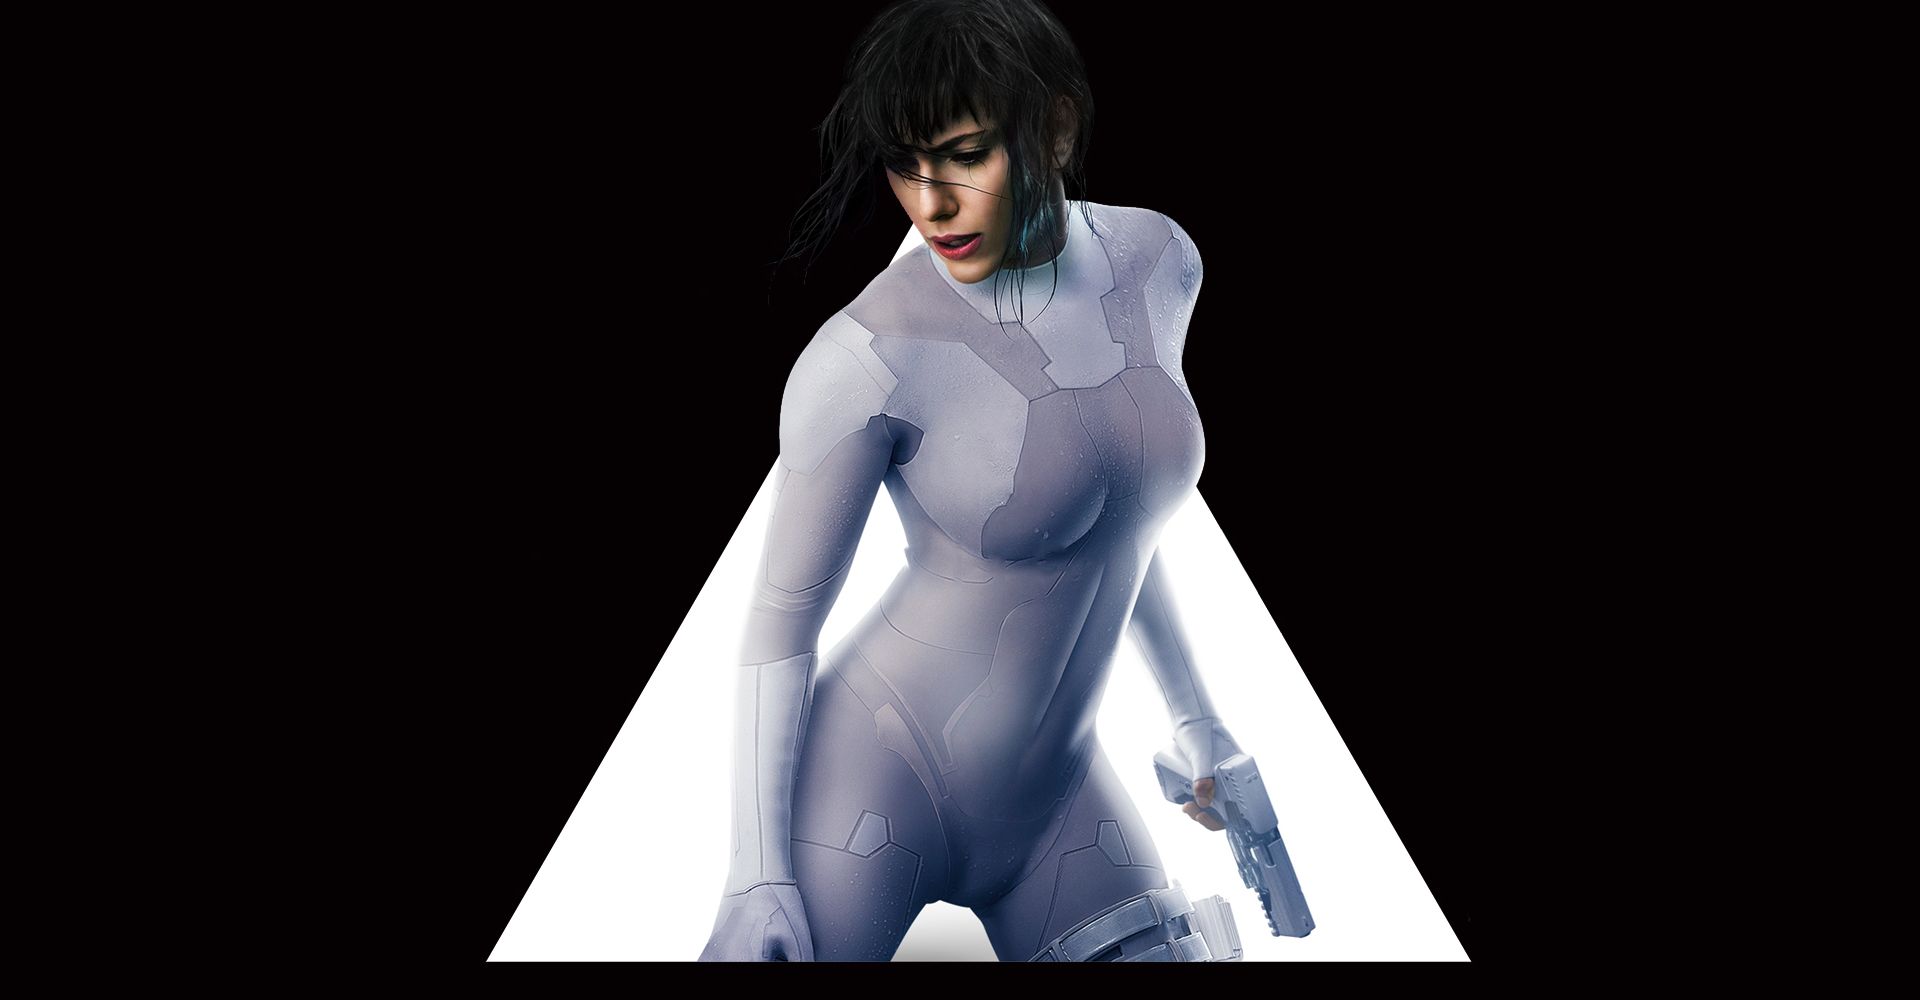 Wallpaper Ghost in the shell, 2017 movie, actress